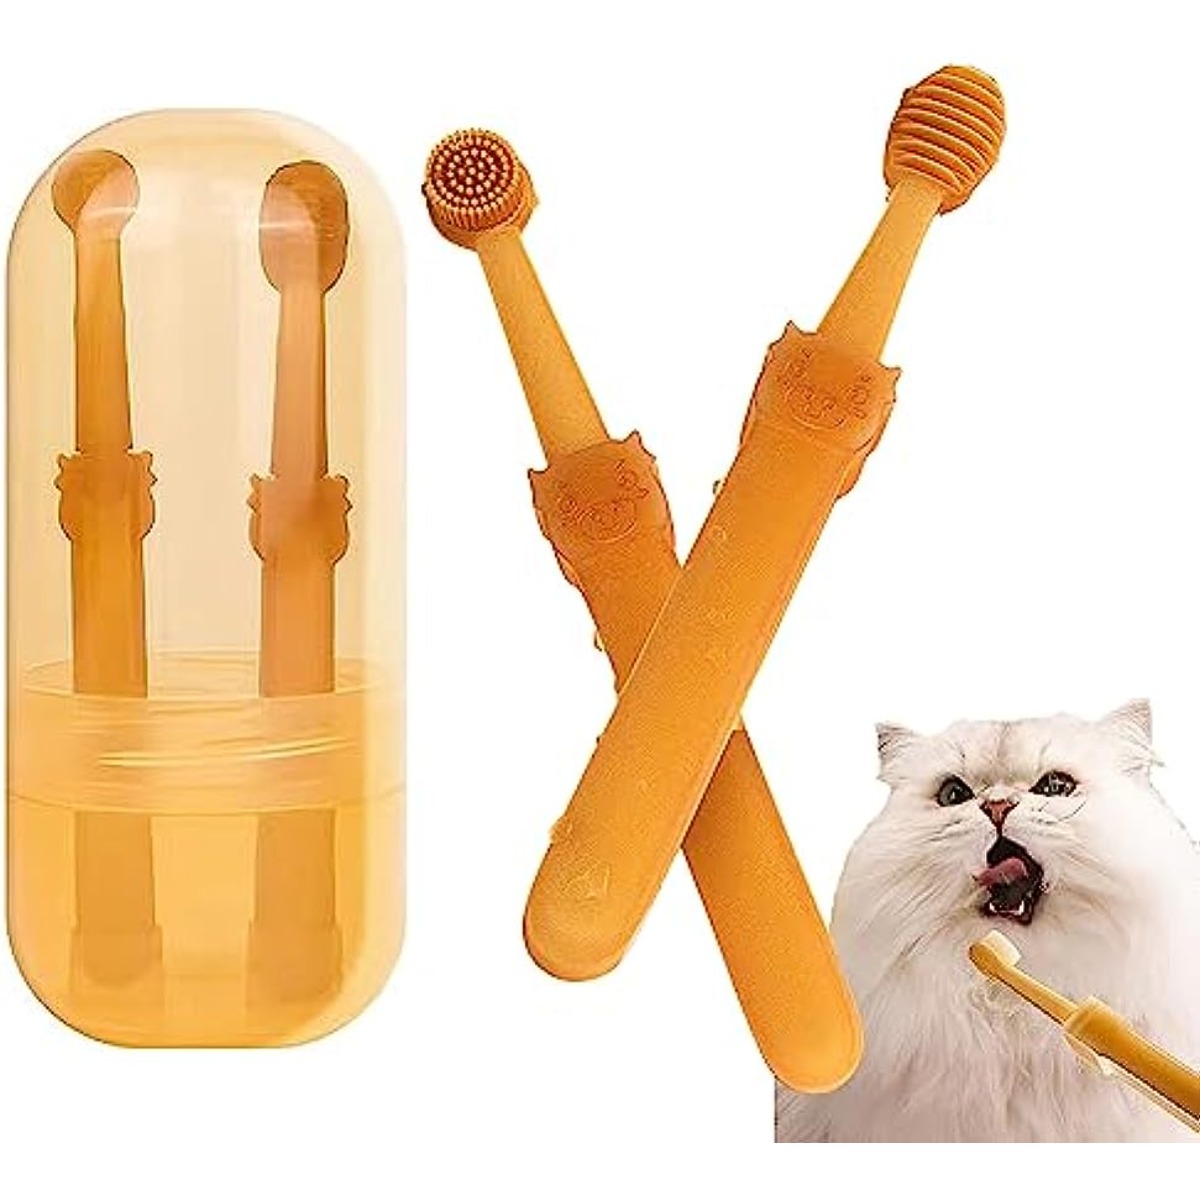 

2pcs Small Dog & Cat Toothbrush Kit With Storage Box, Soft Silicone Cat Dog Tooth Brushing Kit, Tongue Cleaner For Pet Tooth Brushing